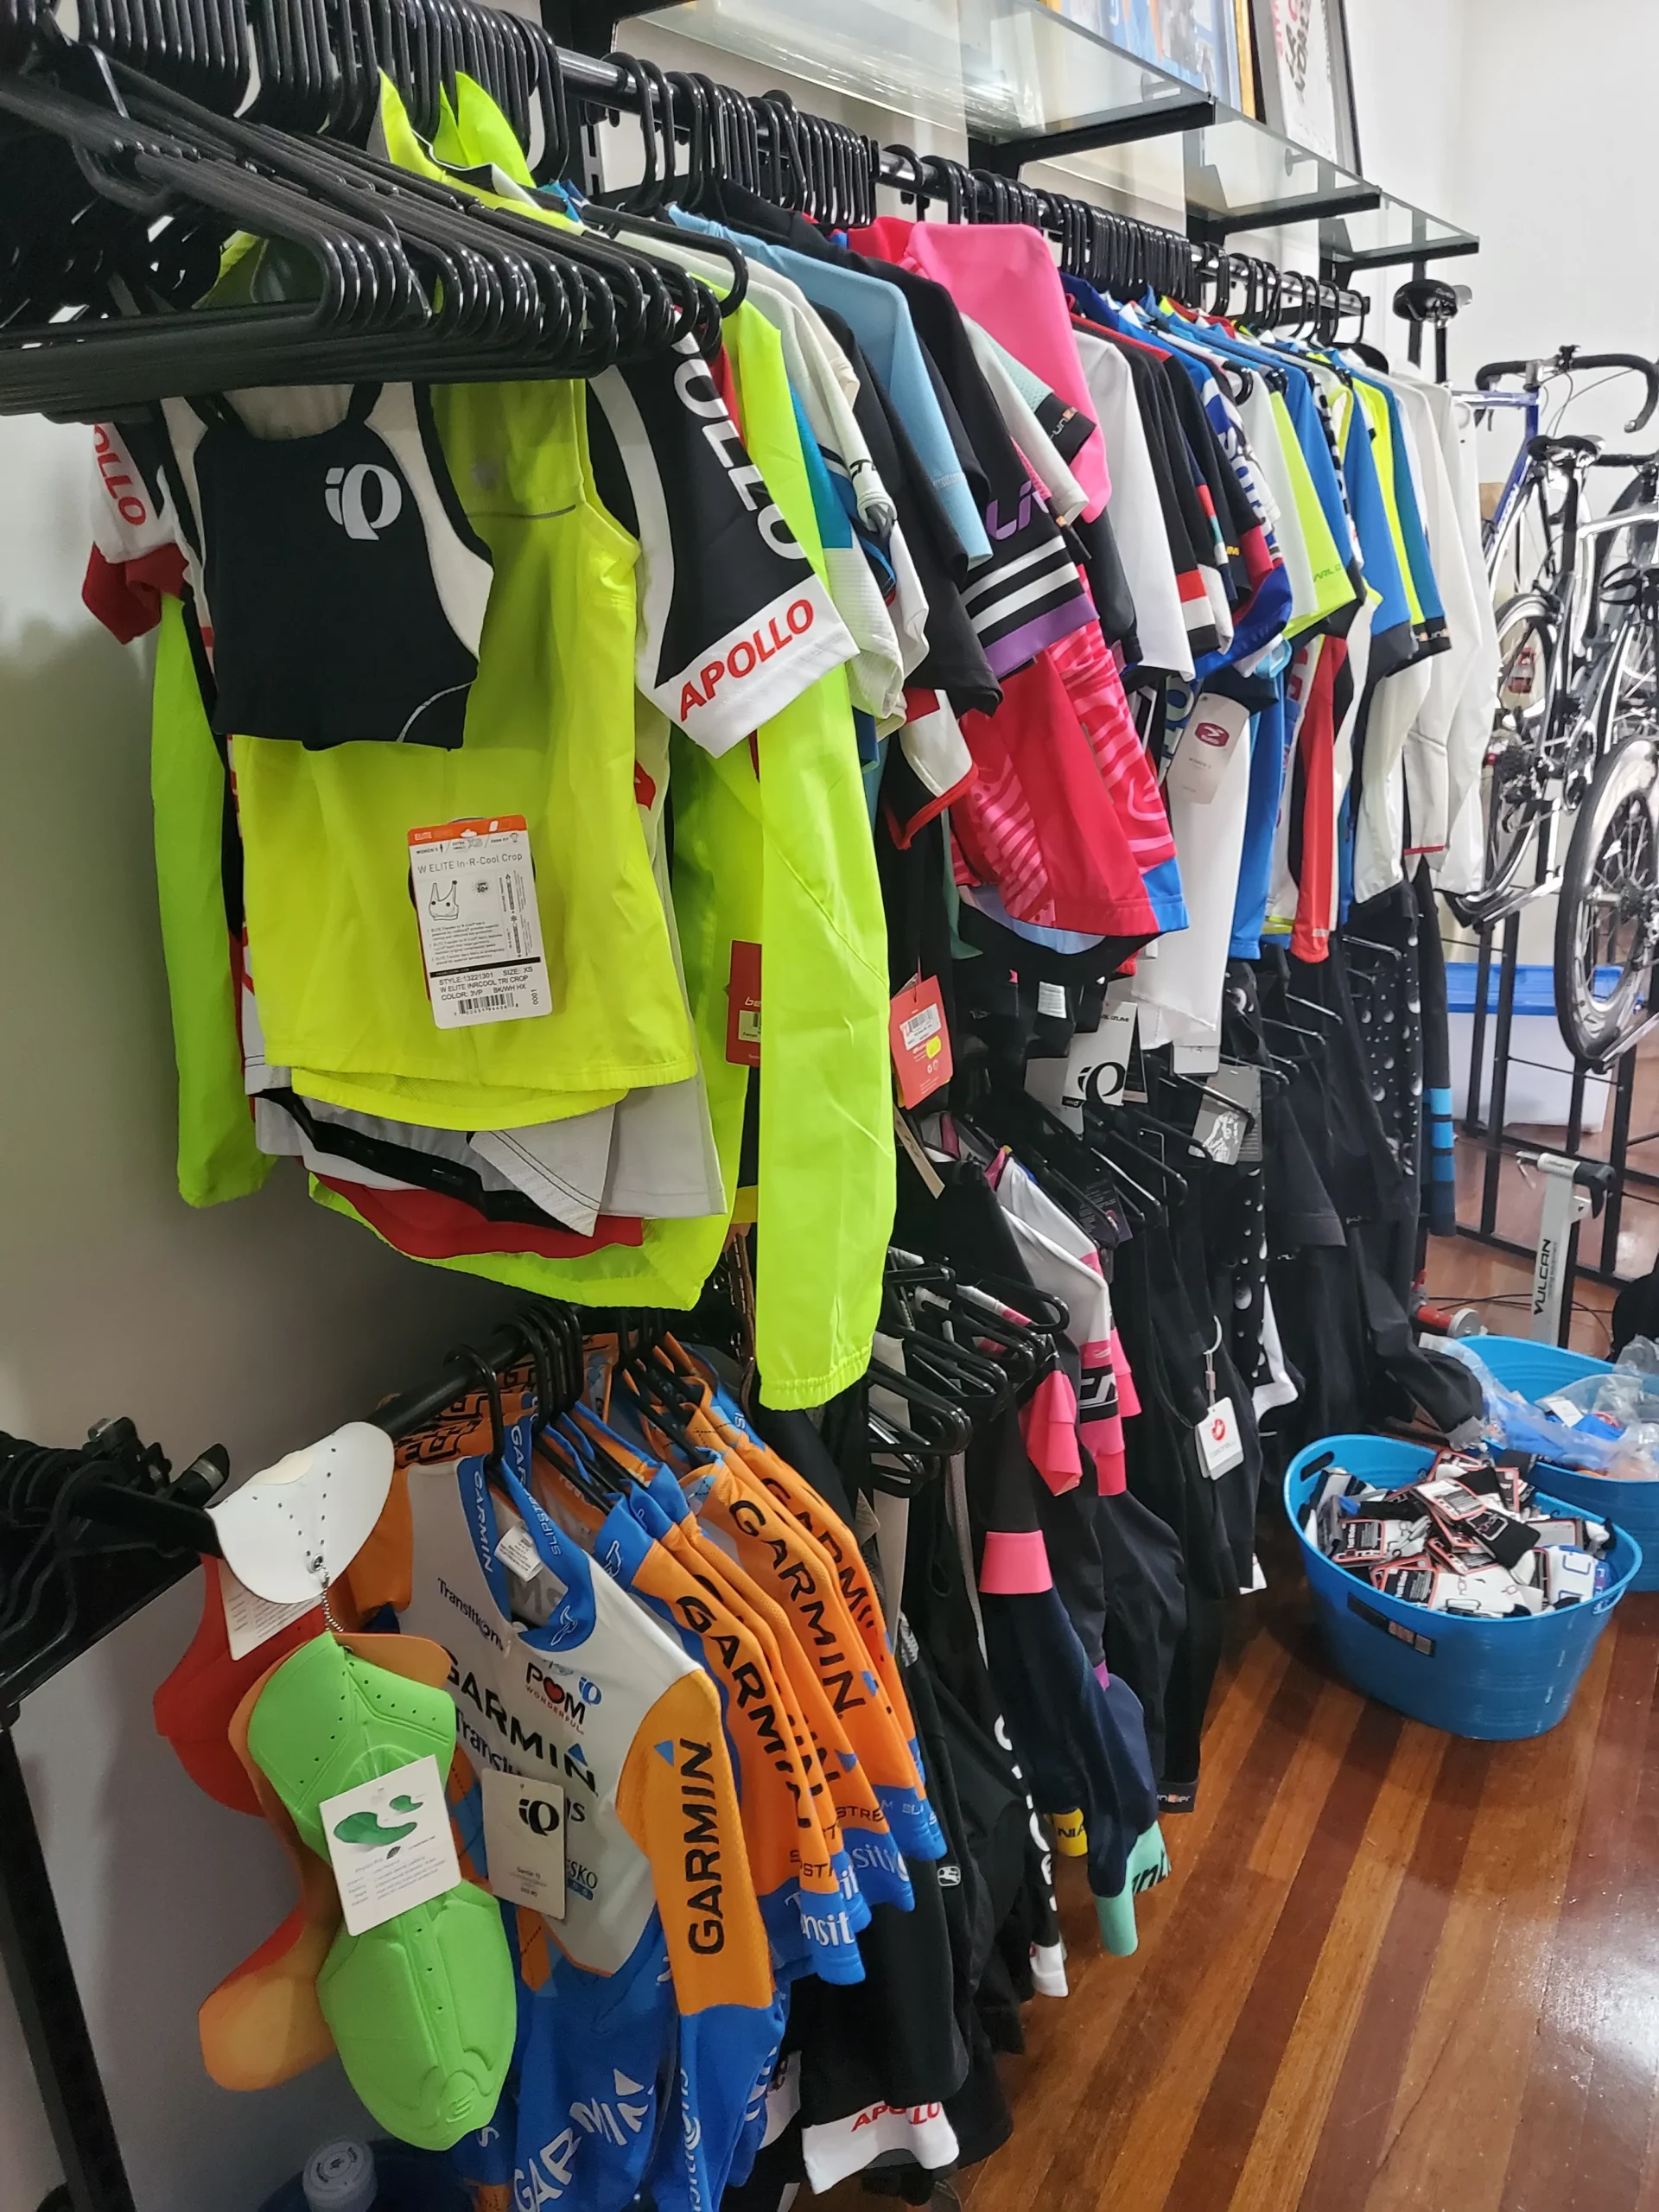 Cyclemania shop offering a variety of bikes, clothing for biking, and a wide selection of cycling accessories.